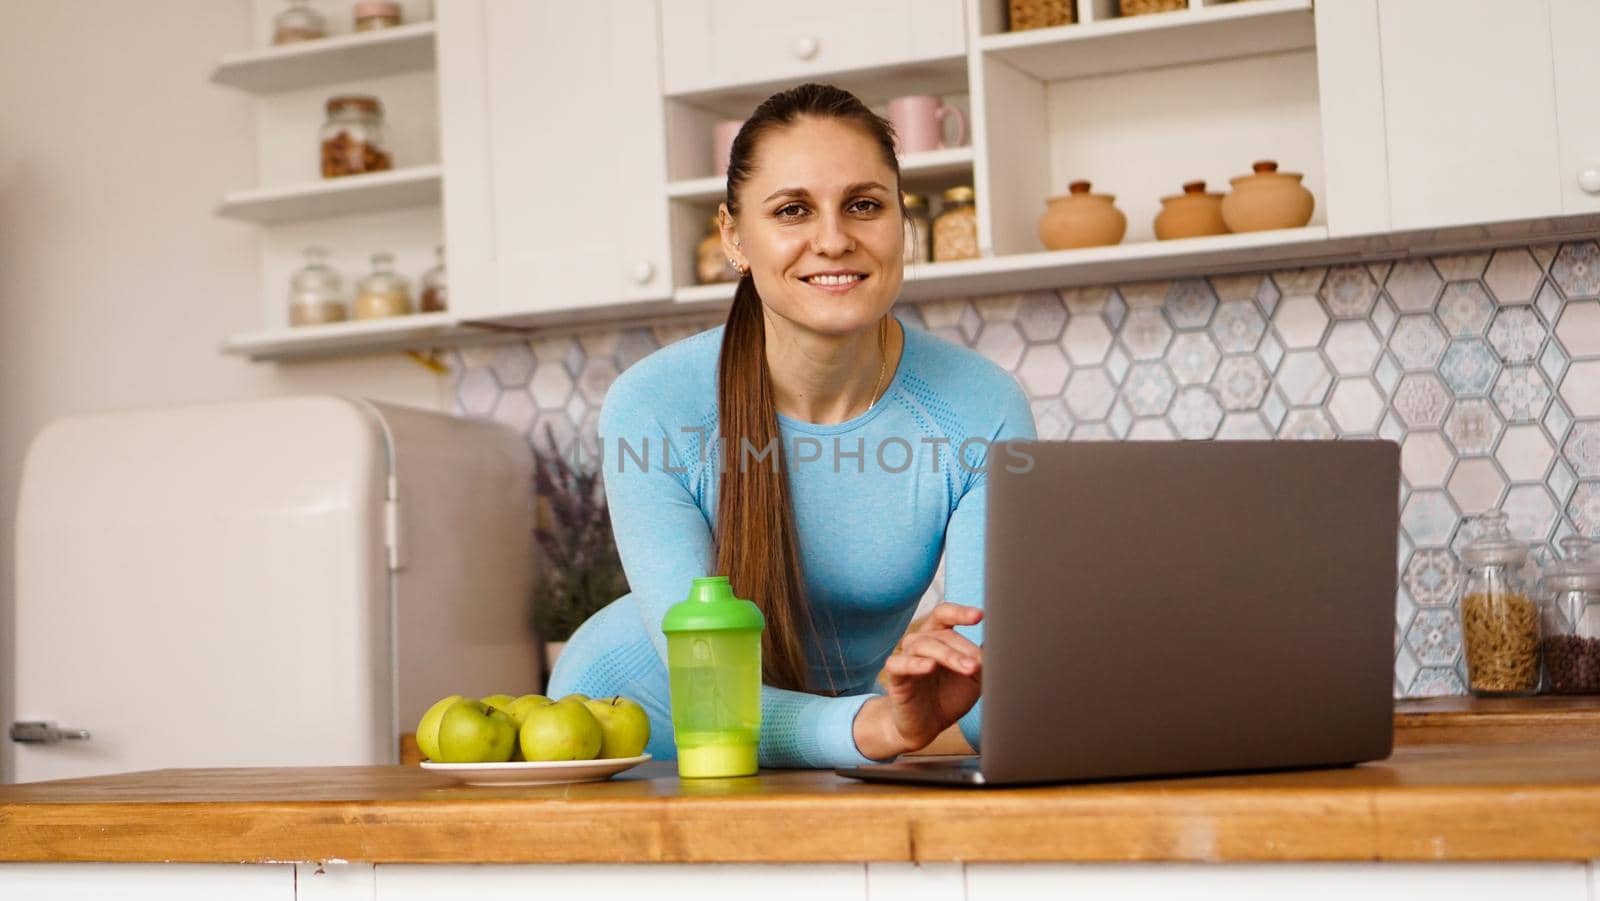 Smiling woman using computer in modern kitchen. Healthy lifestyle concept by natali_brill